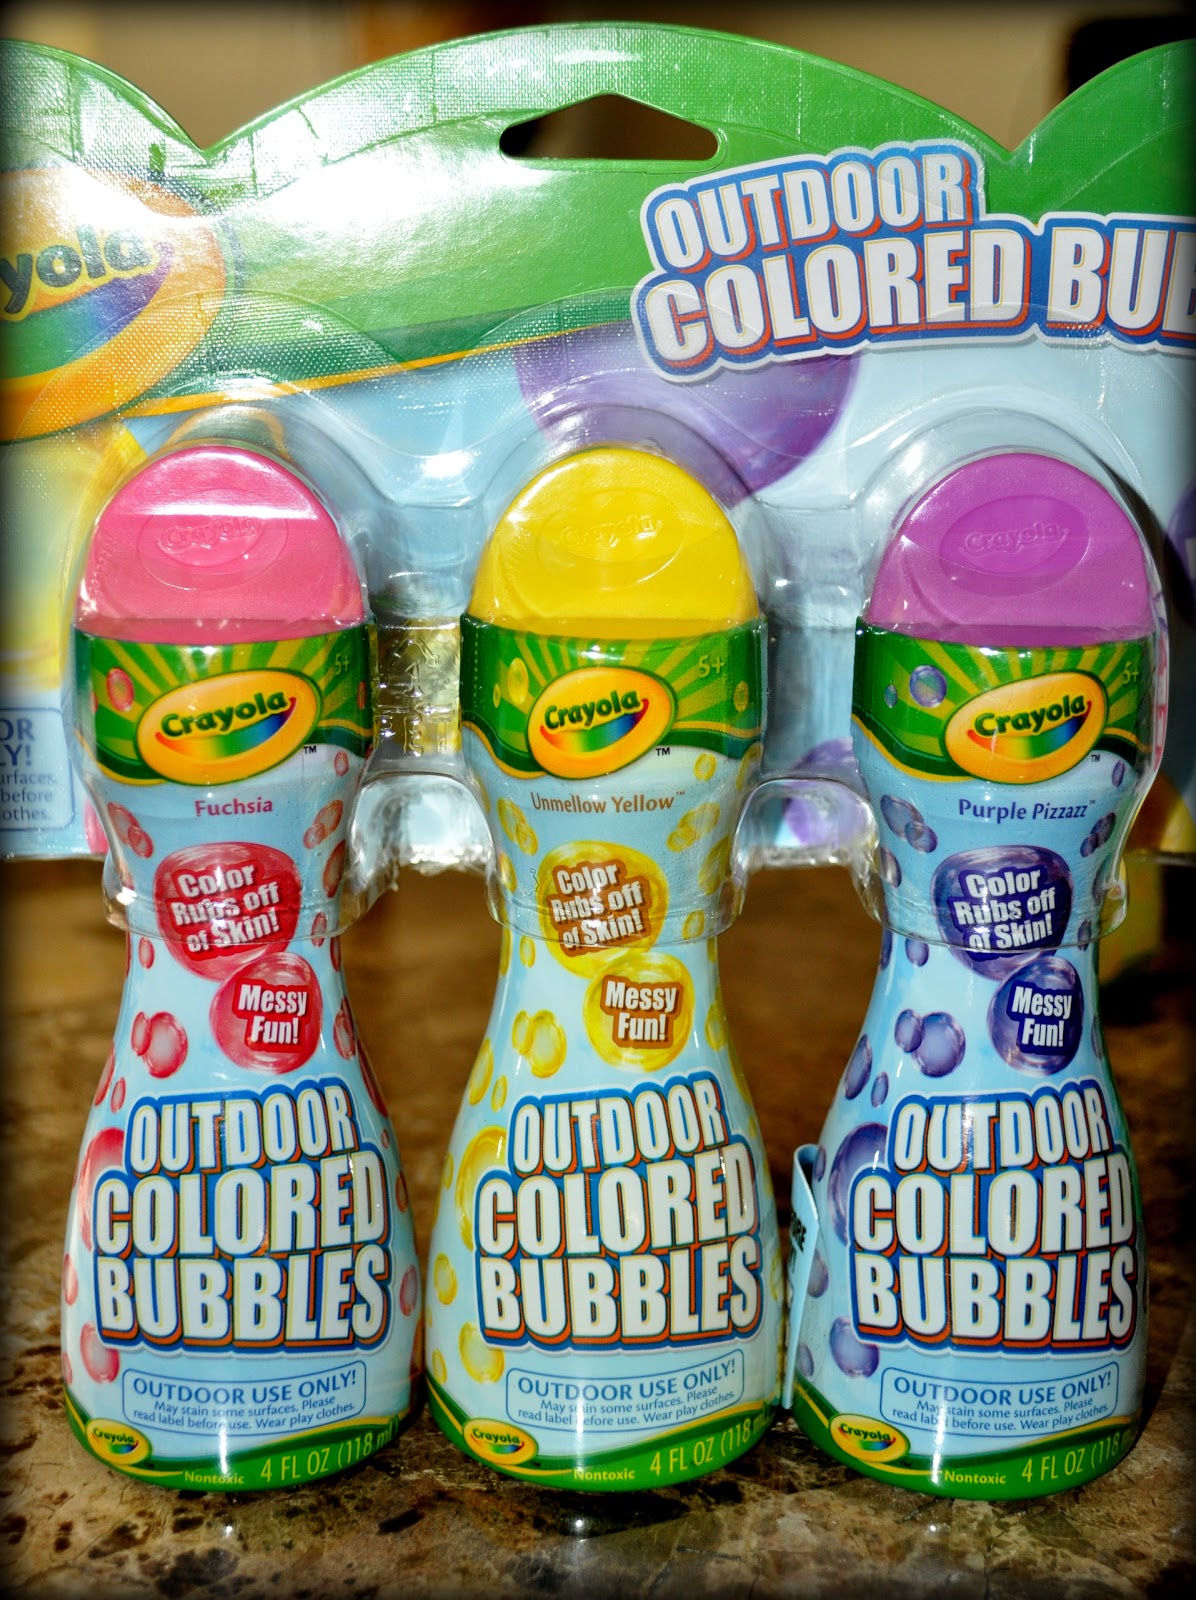 Download Life's Perception & Inspiration: Crayola Outdoor Colored Bubbles Giveaway